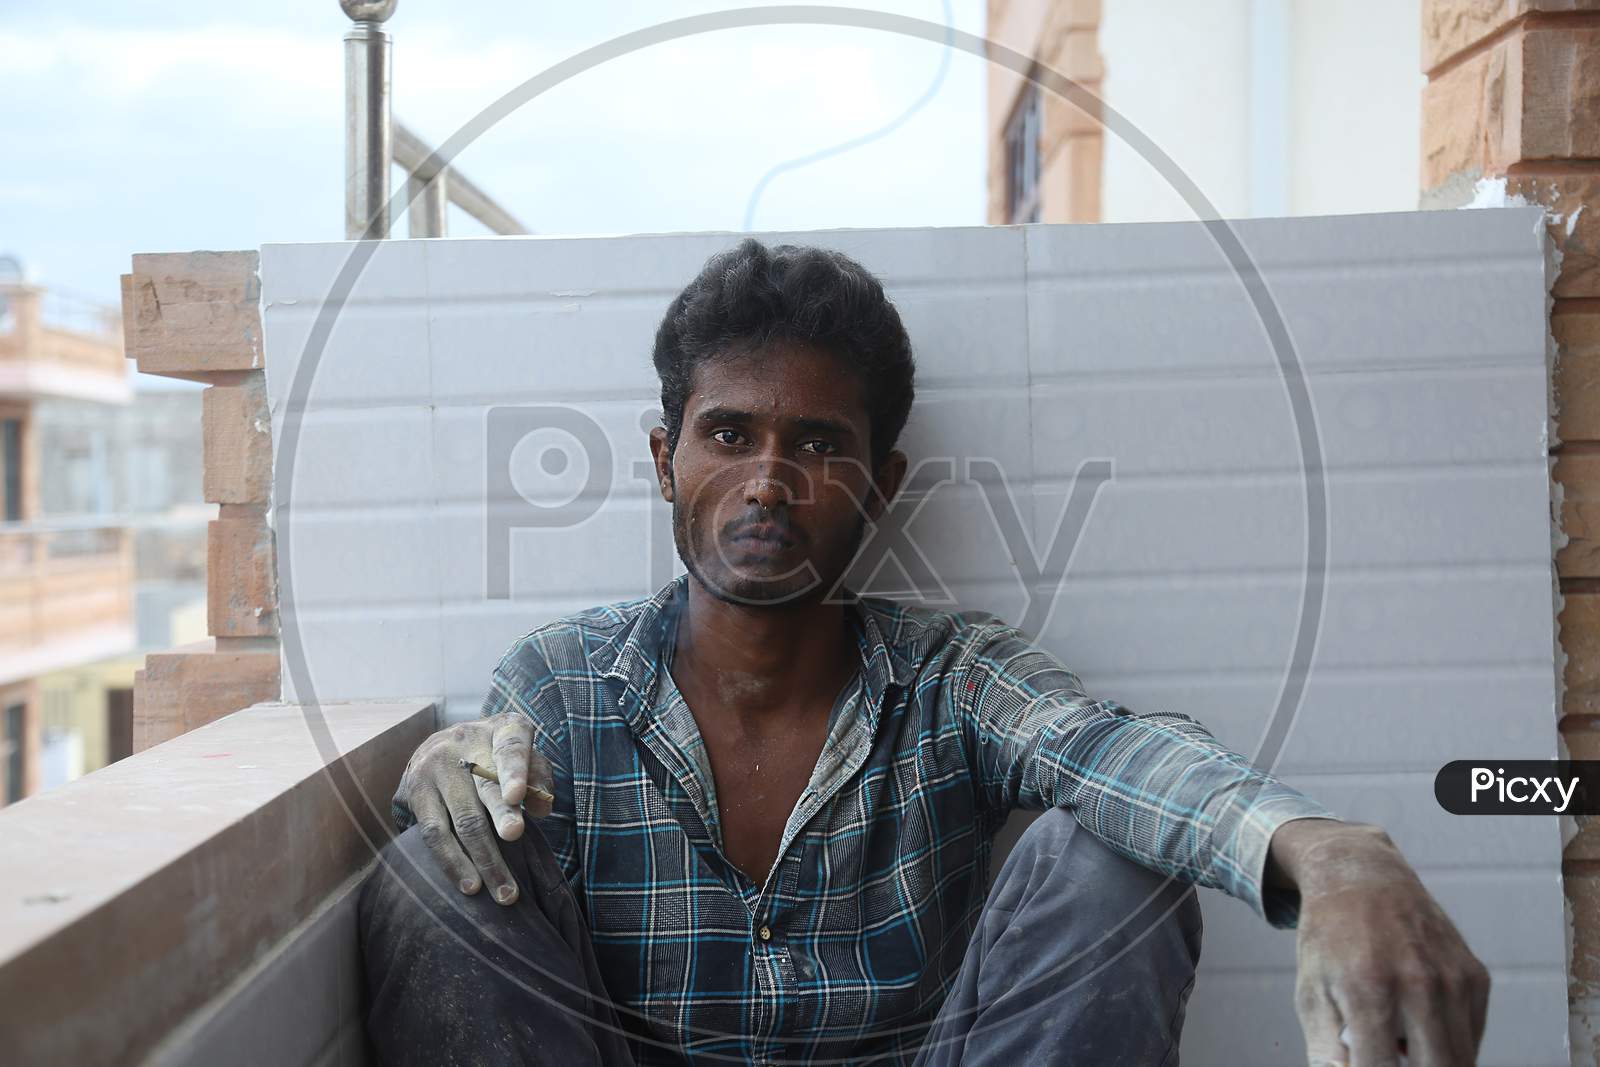 Jodhpur, Rajasthan, India, 20Th September 2020: Young Indian Male Labour Worker Smoking Cigarette Wearing Dirty Clothes While Sit Relaxing Against The White Wall At Workplace Taking Smoke Break.